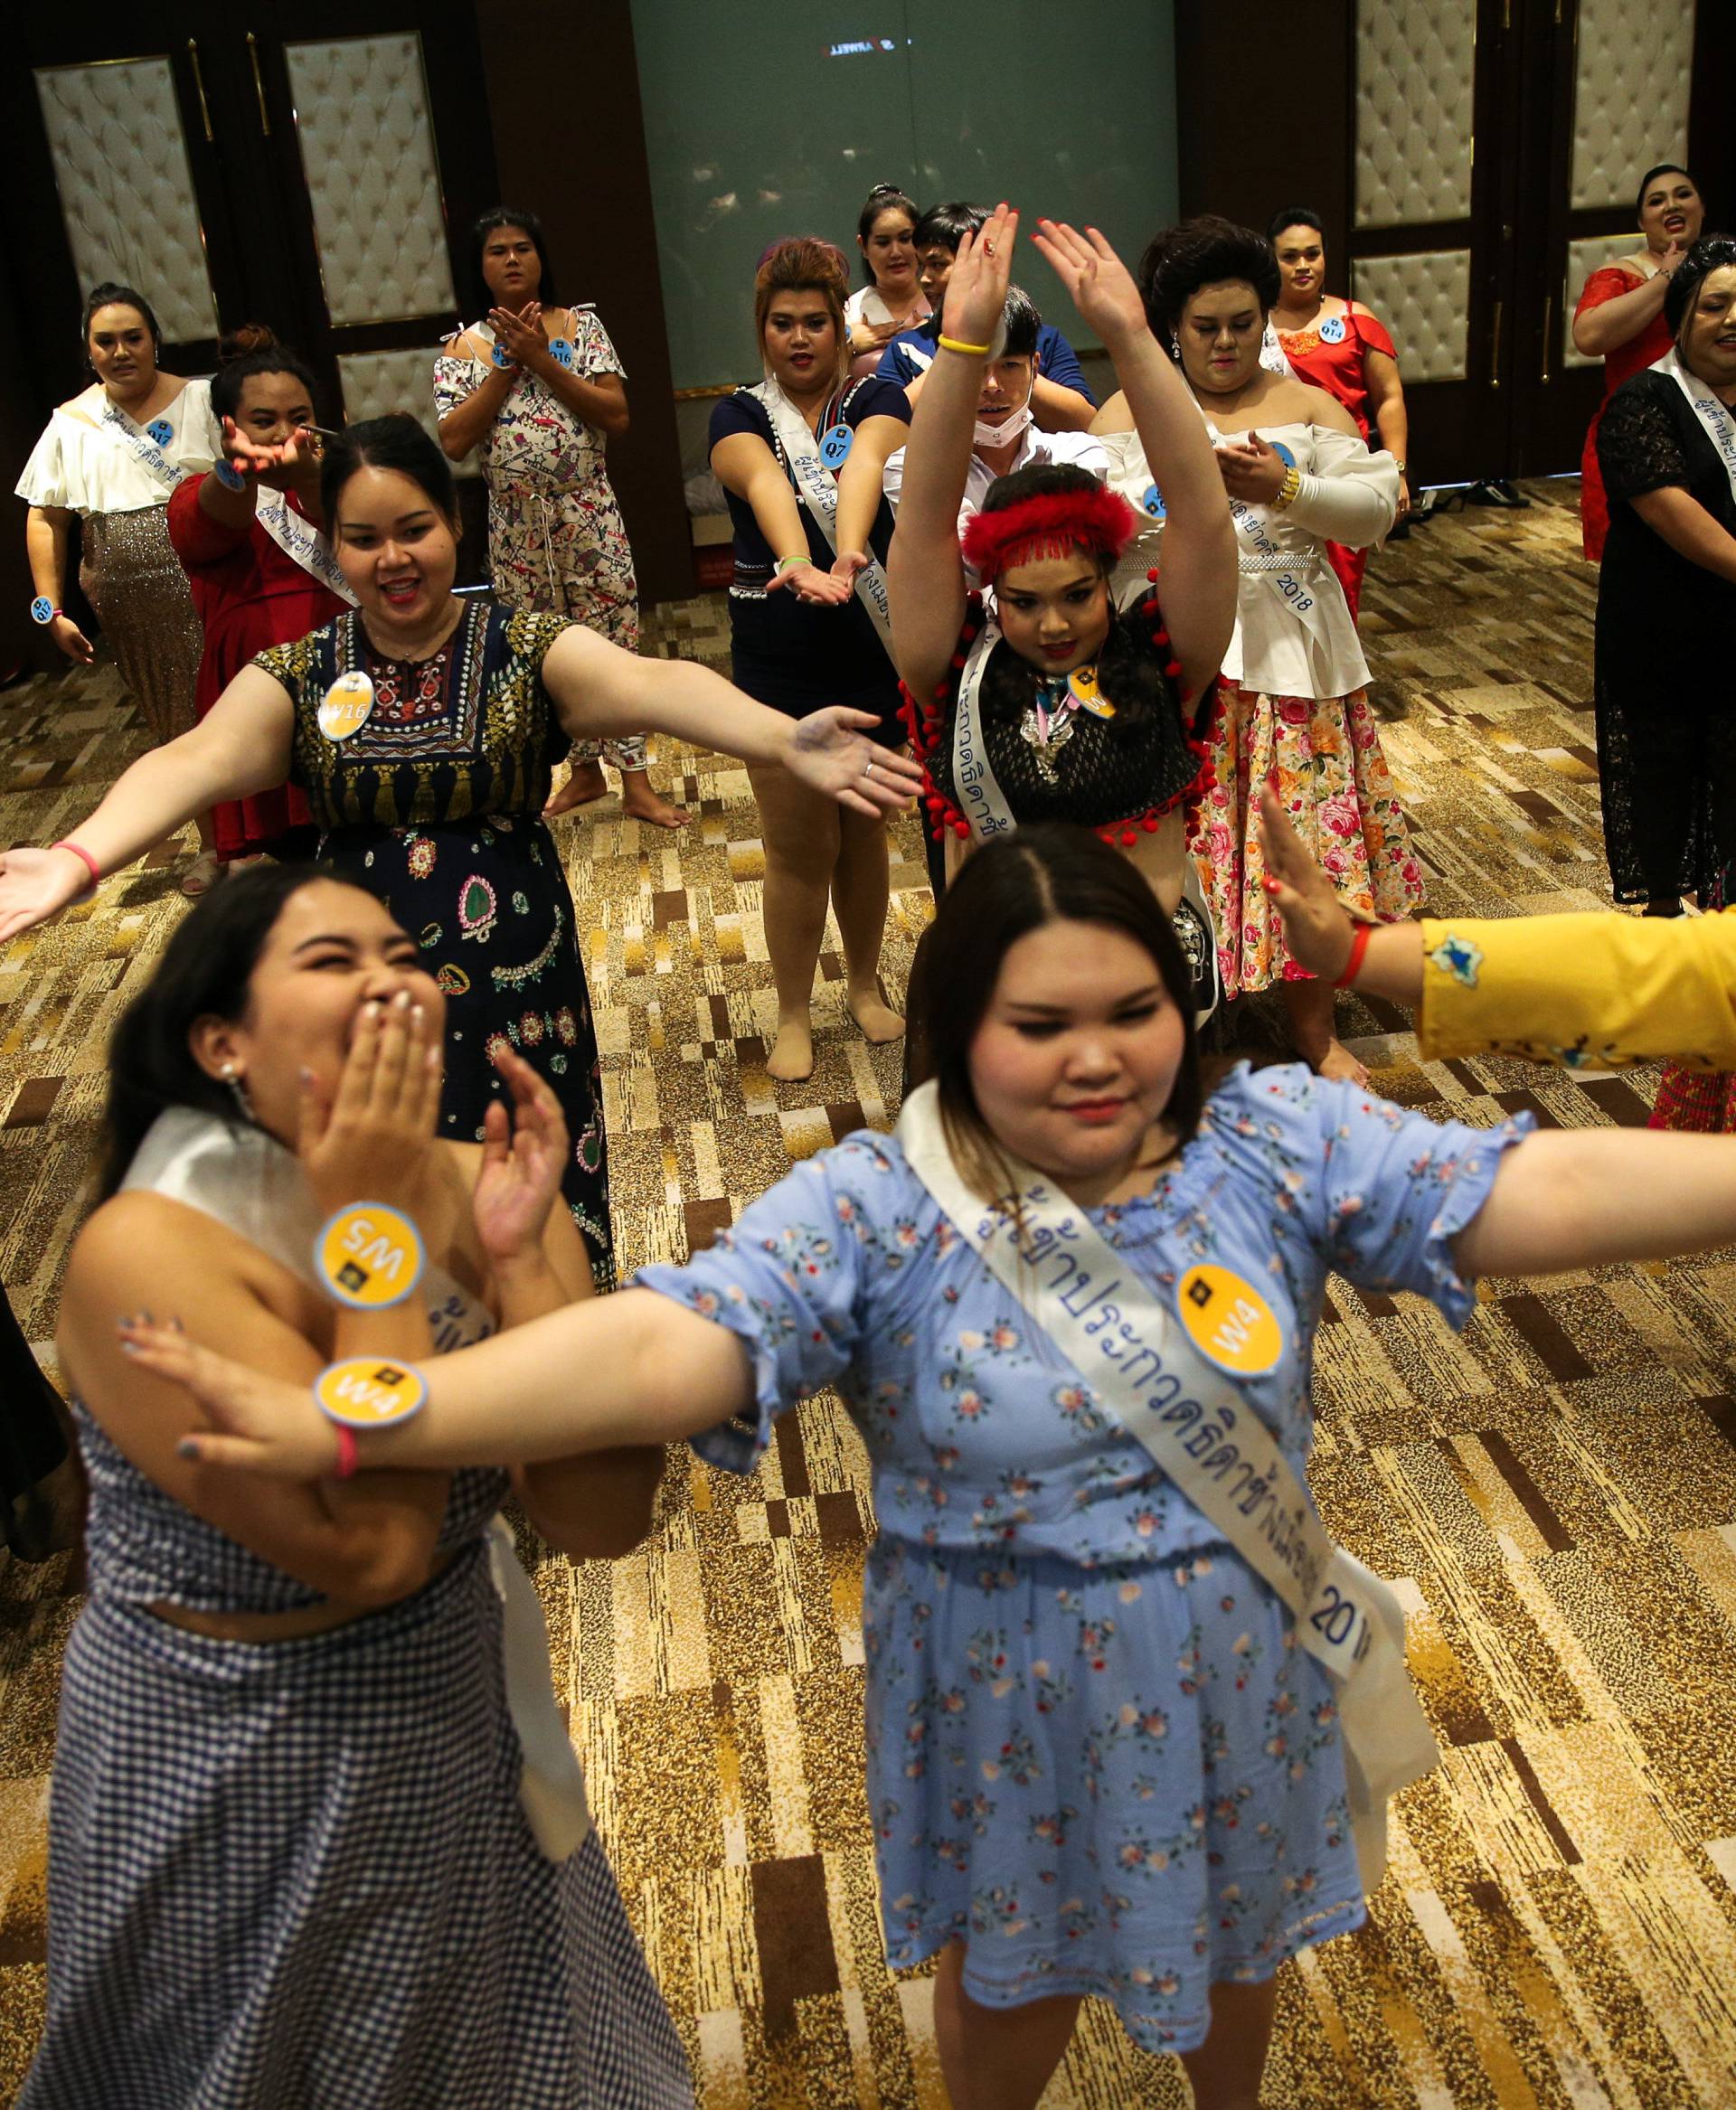 Participants of the Miss Jumbo beauty contest attend a practice session at a hotel in Nakhon Ratchasima